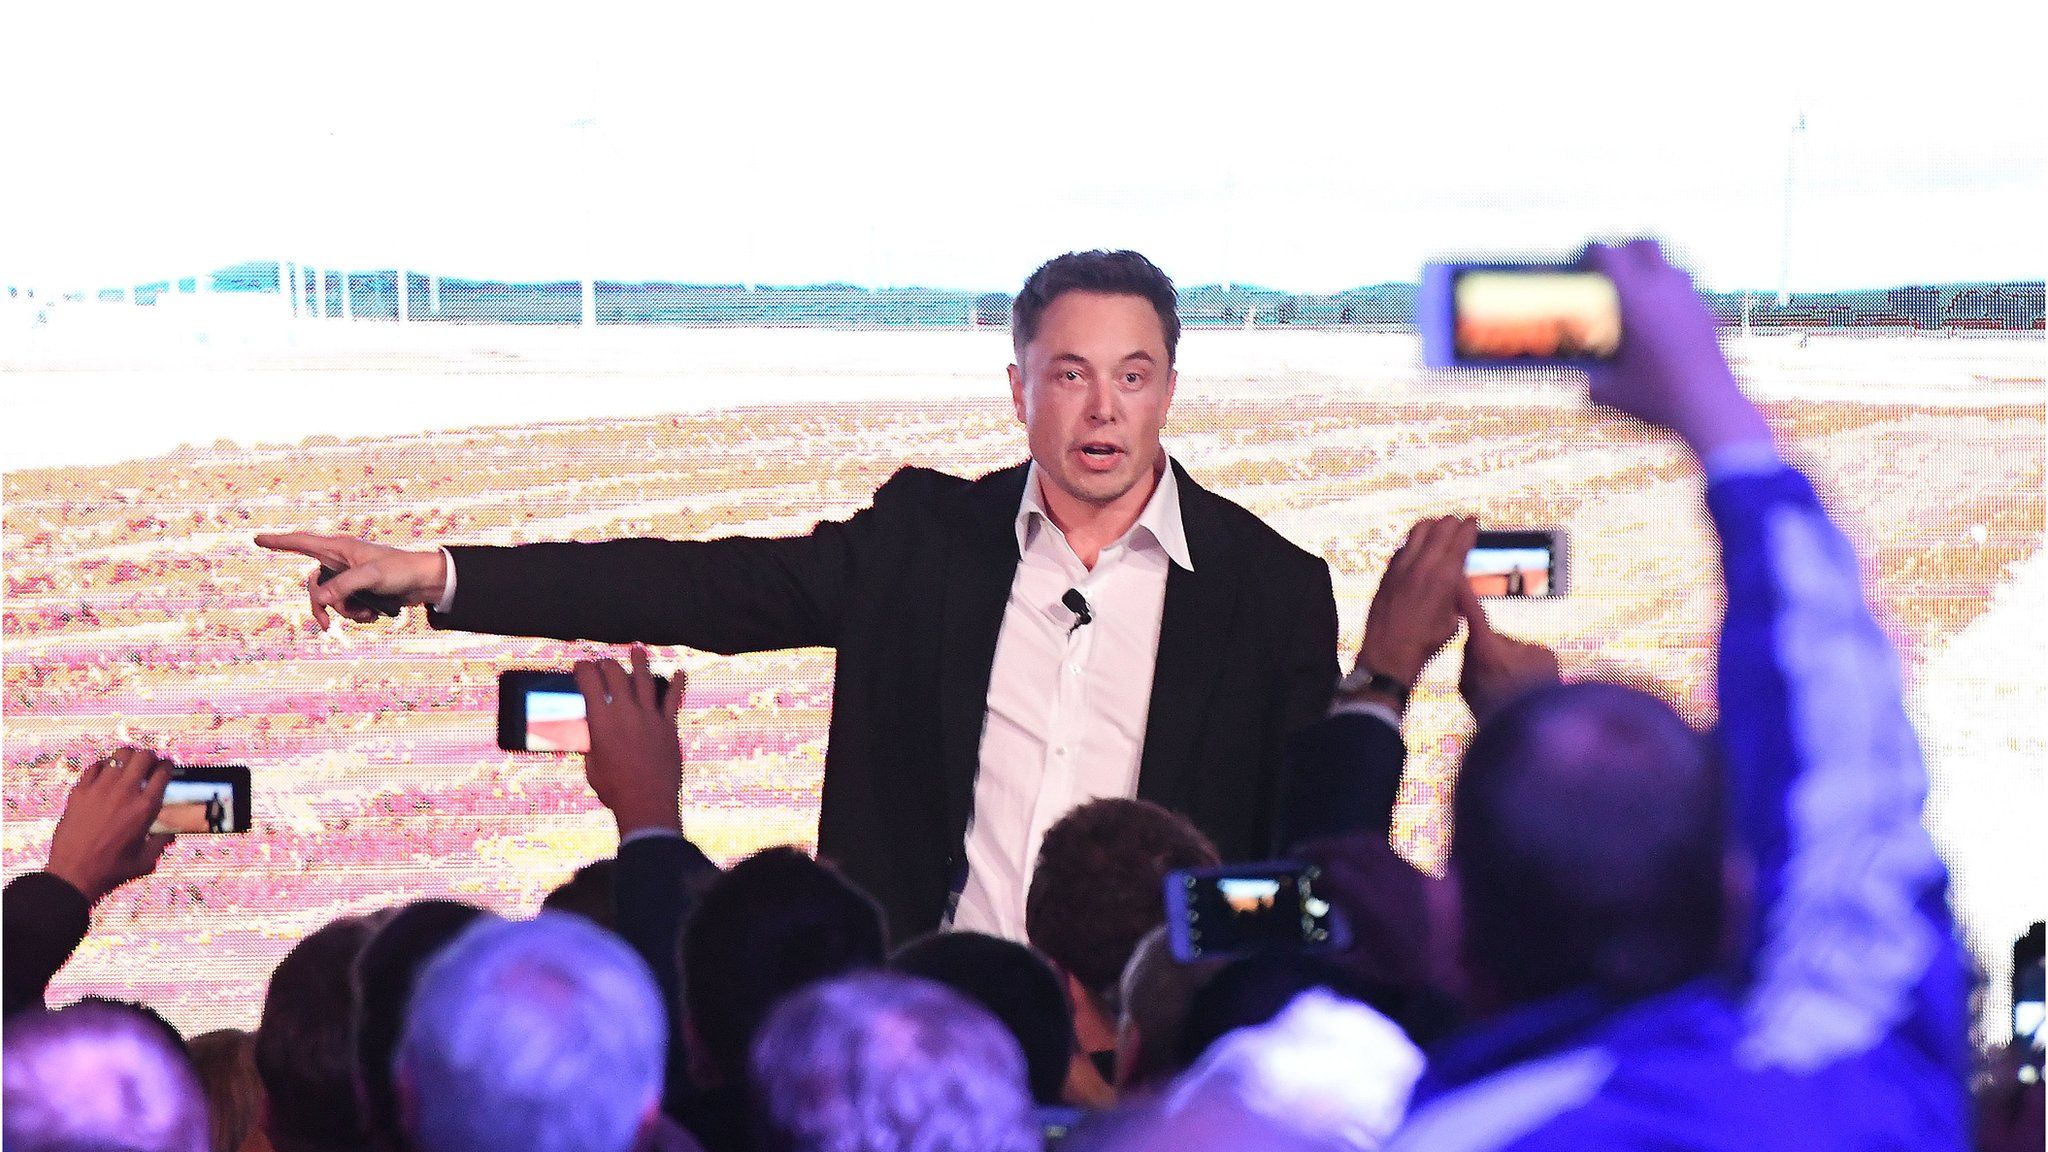 Elon Musk during his presenation at the Tesla Powerpack Launch Event at Hornsdale Wind Farm on September 29, 2017 in Adelaide, Australia